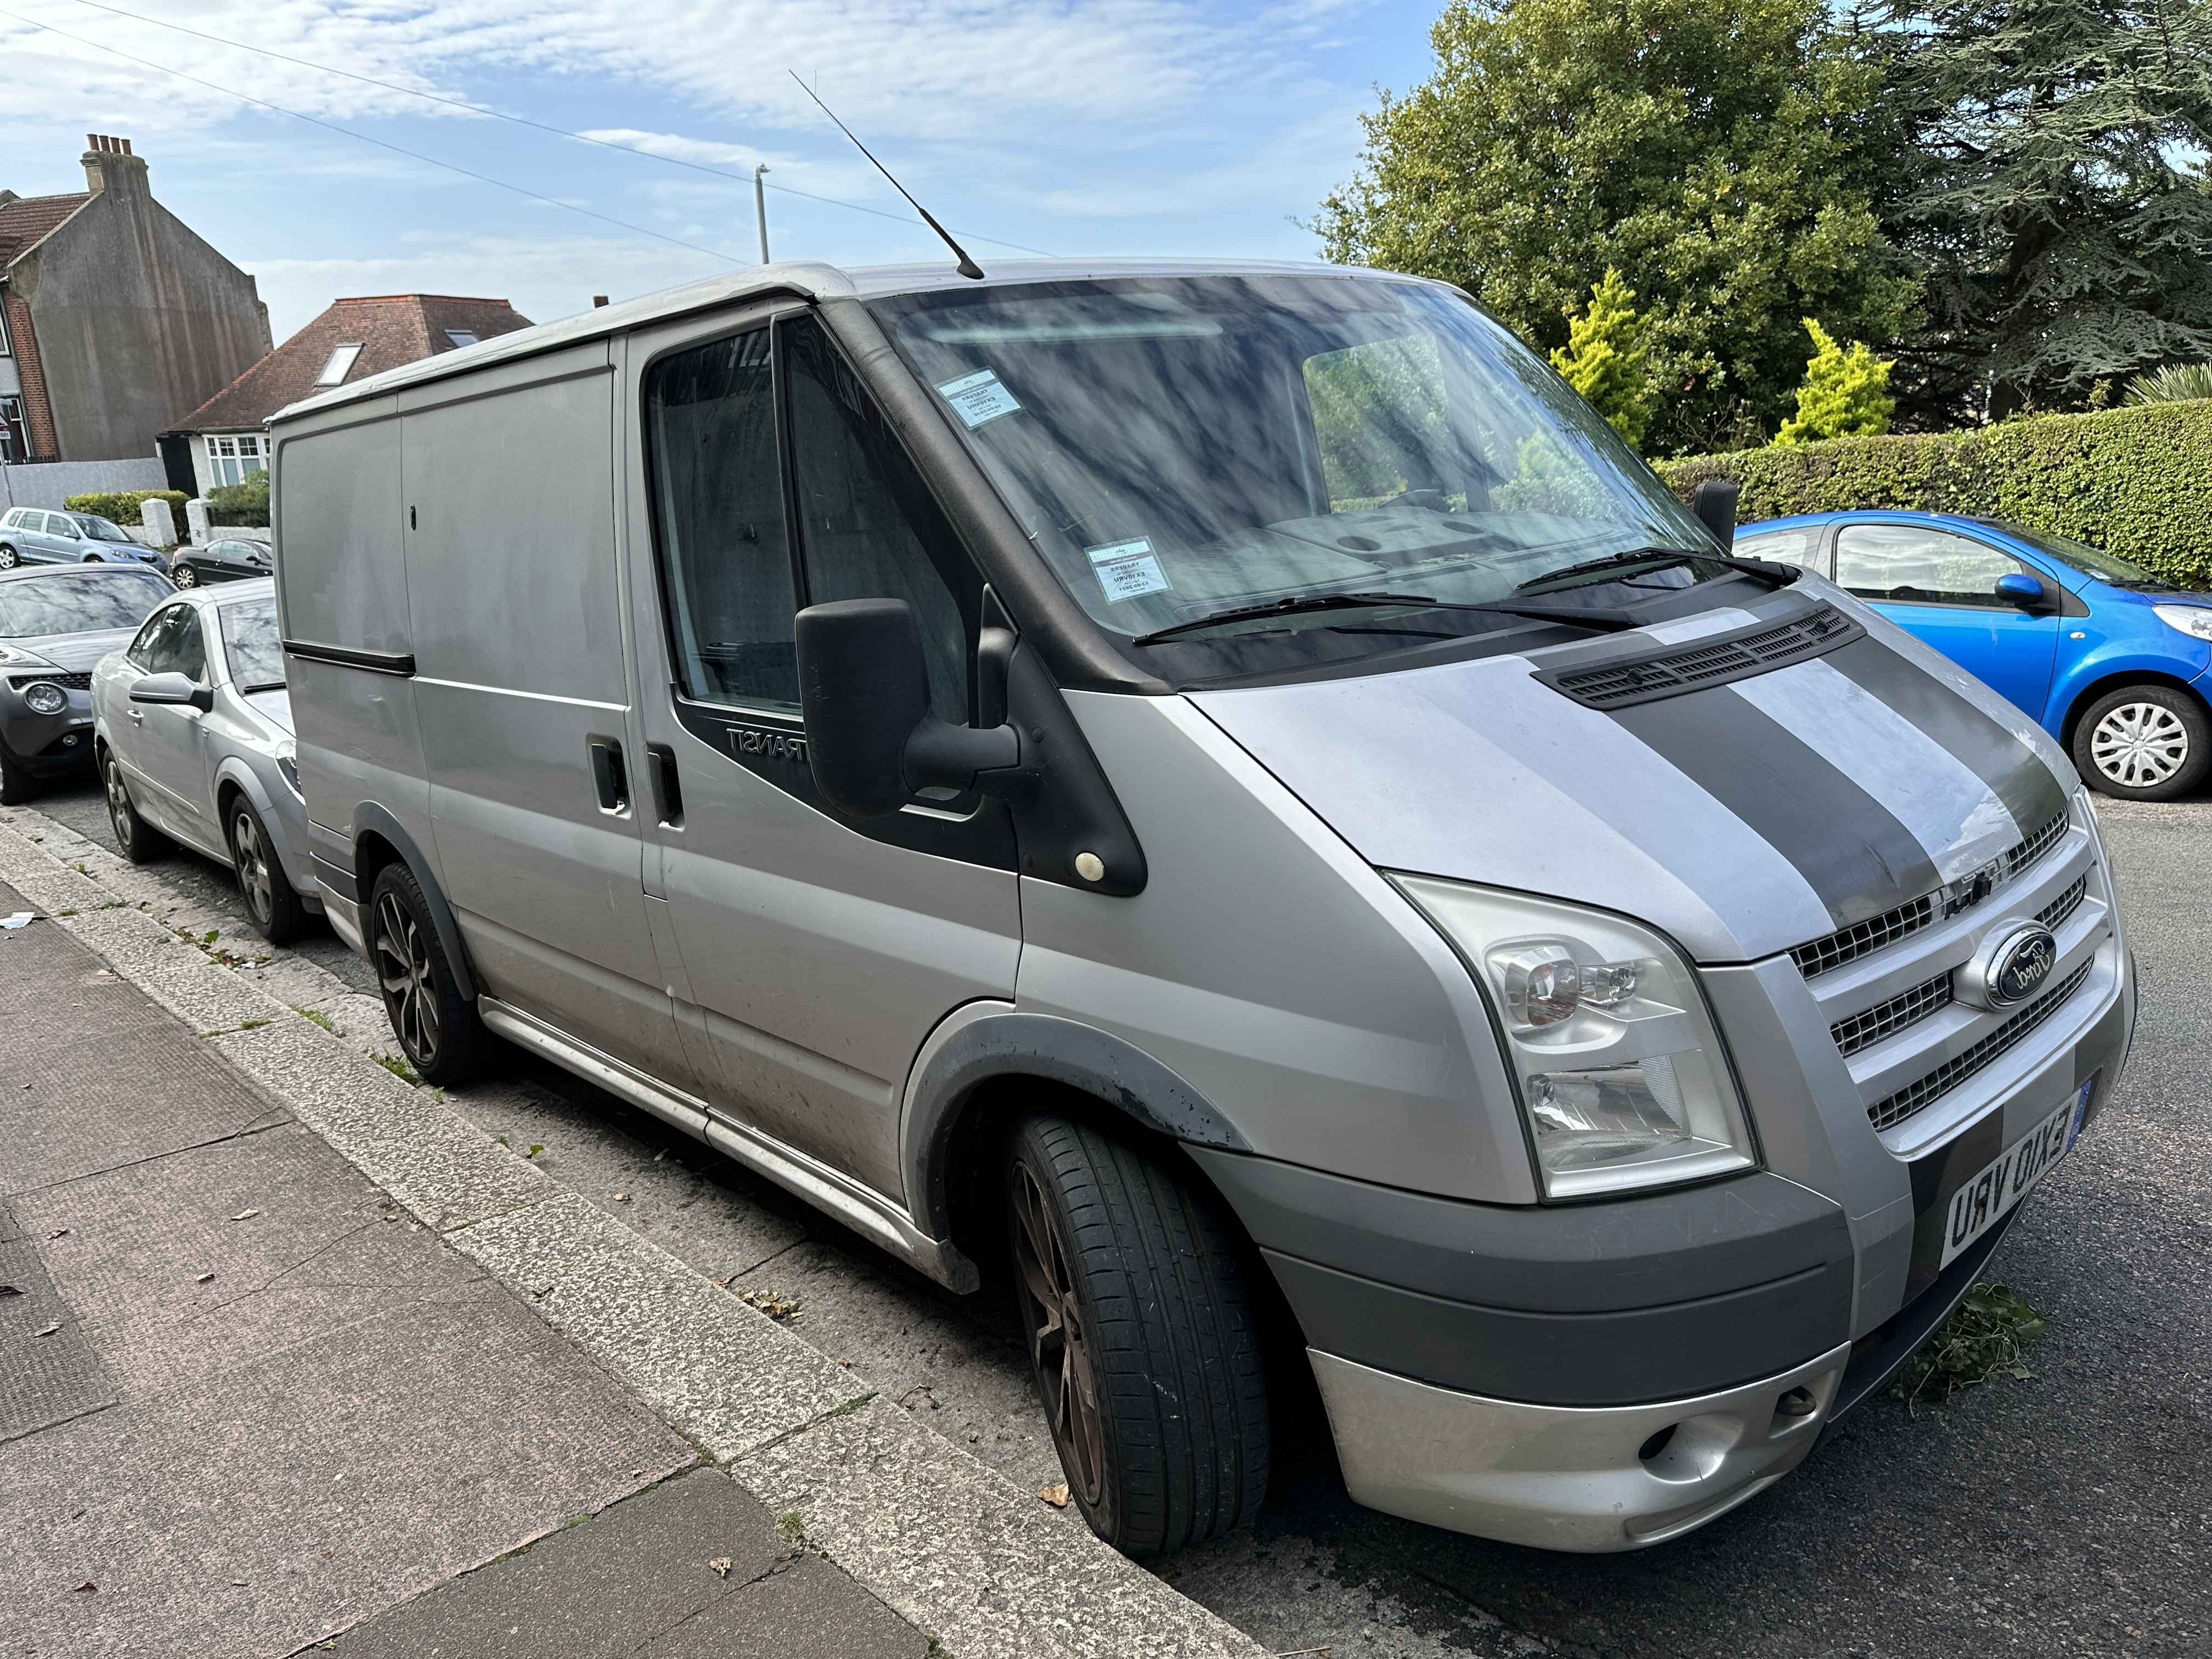 Photograph of EX10 VRU - a Silver Ford Transit parked in Hollingdean by a non-resident. The third of ten photographs supplied by the residents of Hollingdean.